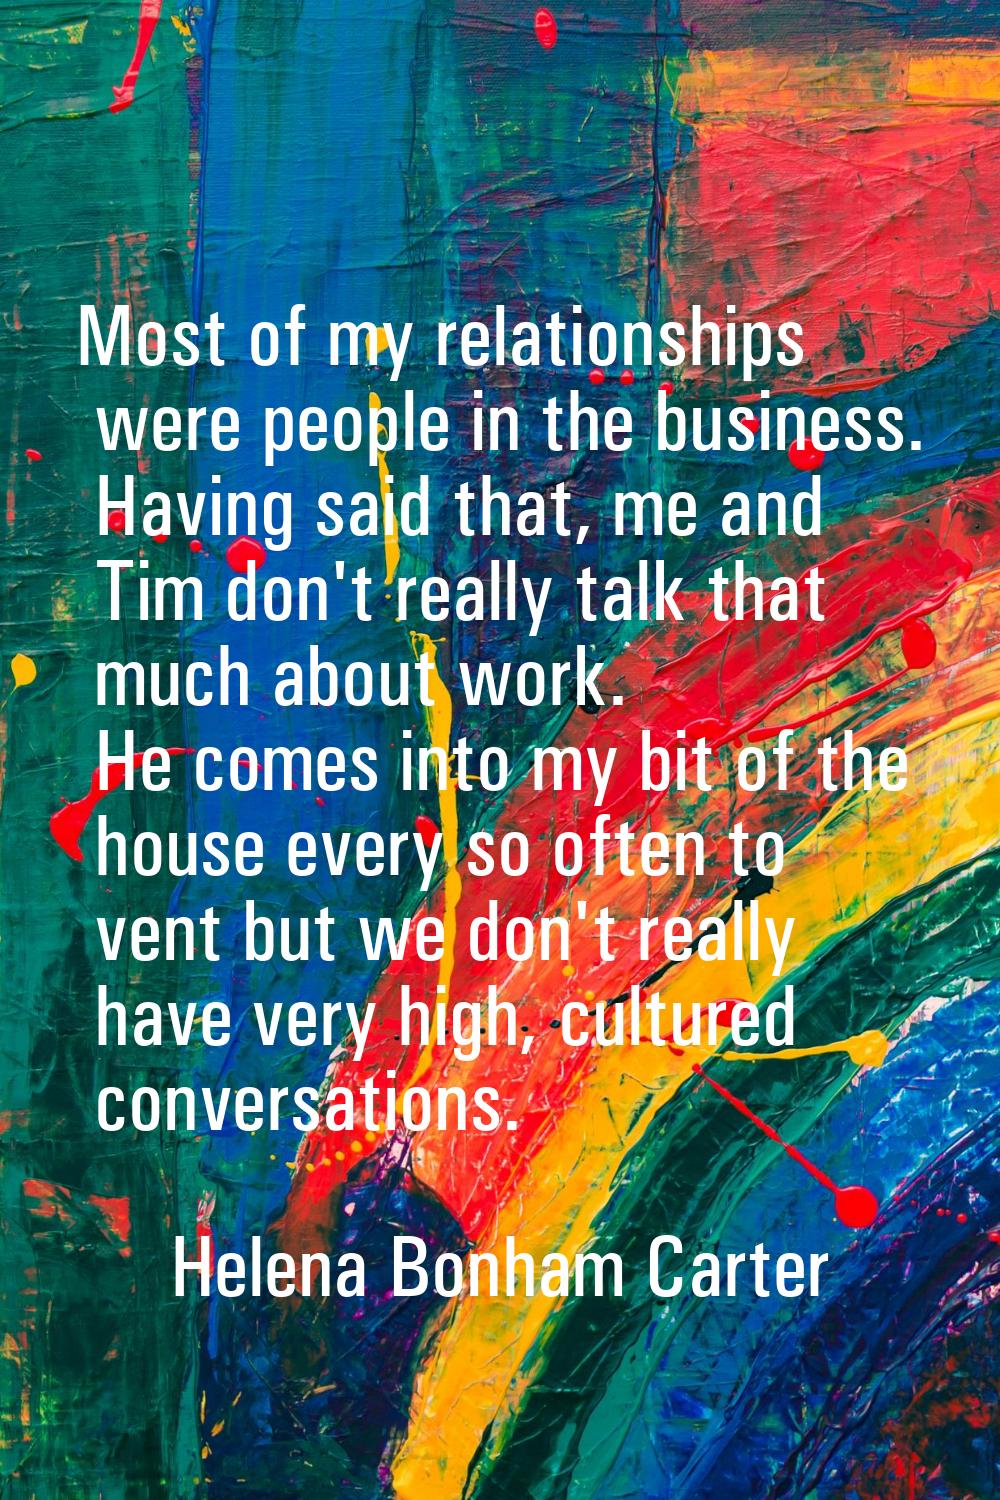 Most of my relationships were people in the business. Having said that, me and Tim don't really tal